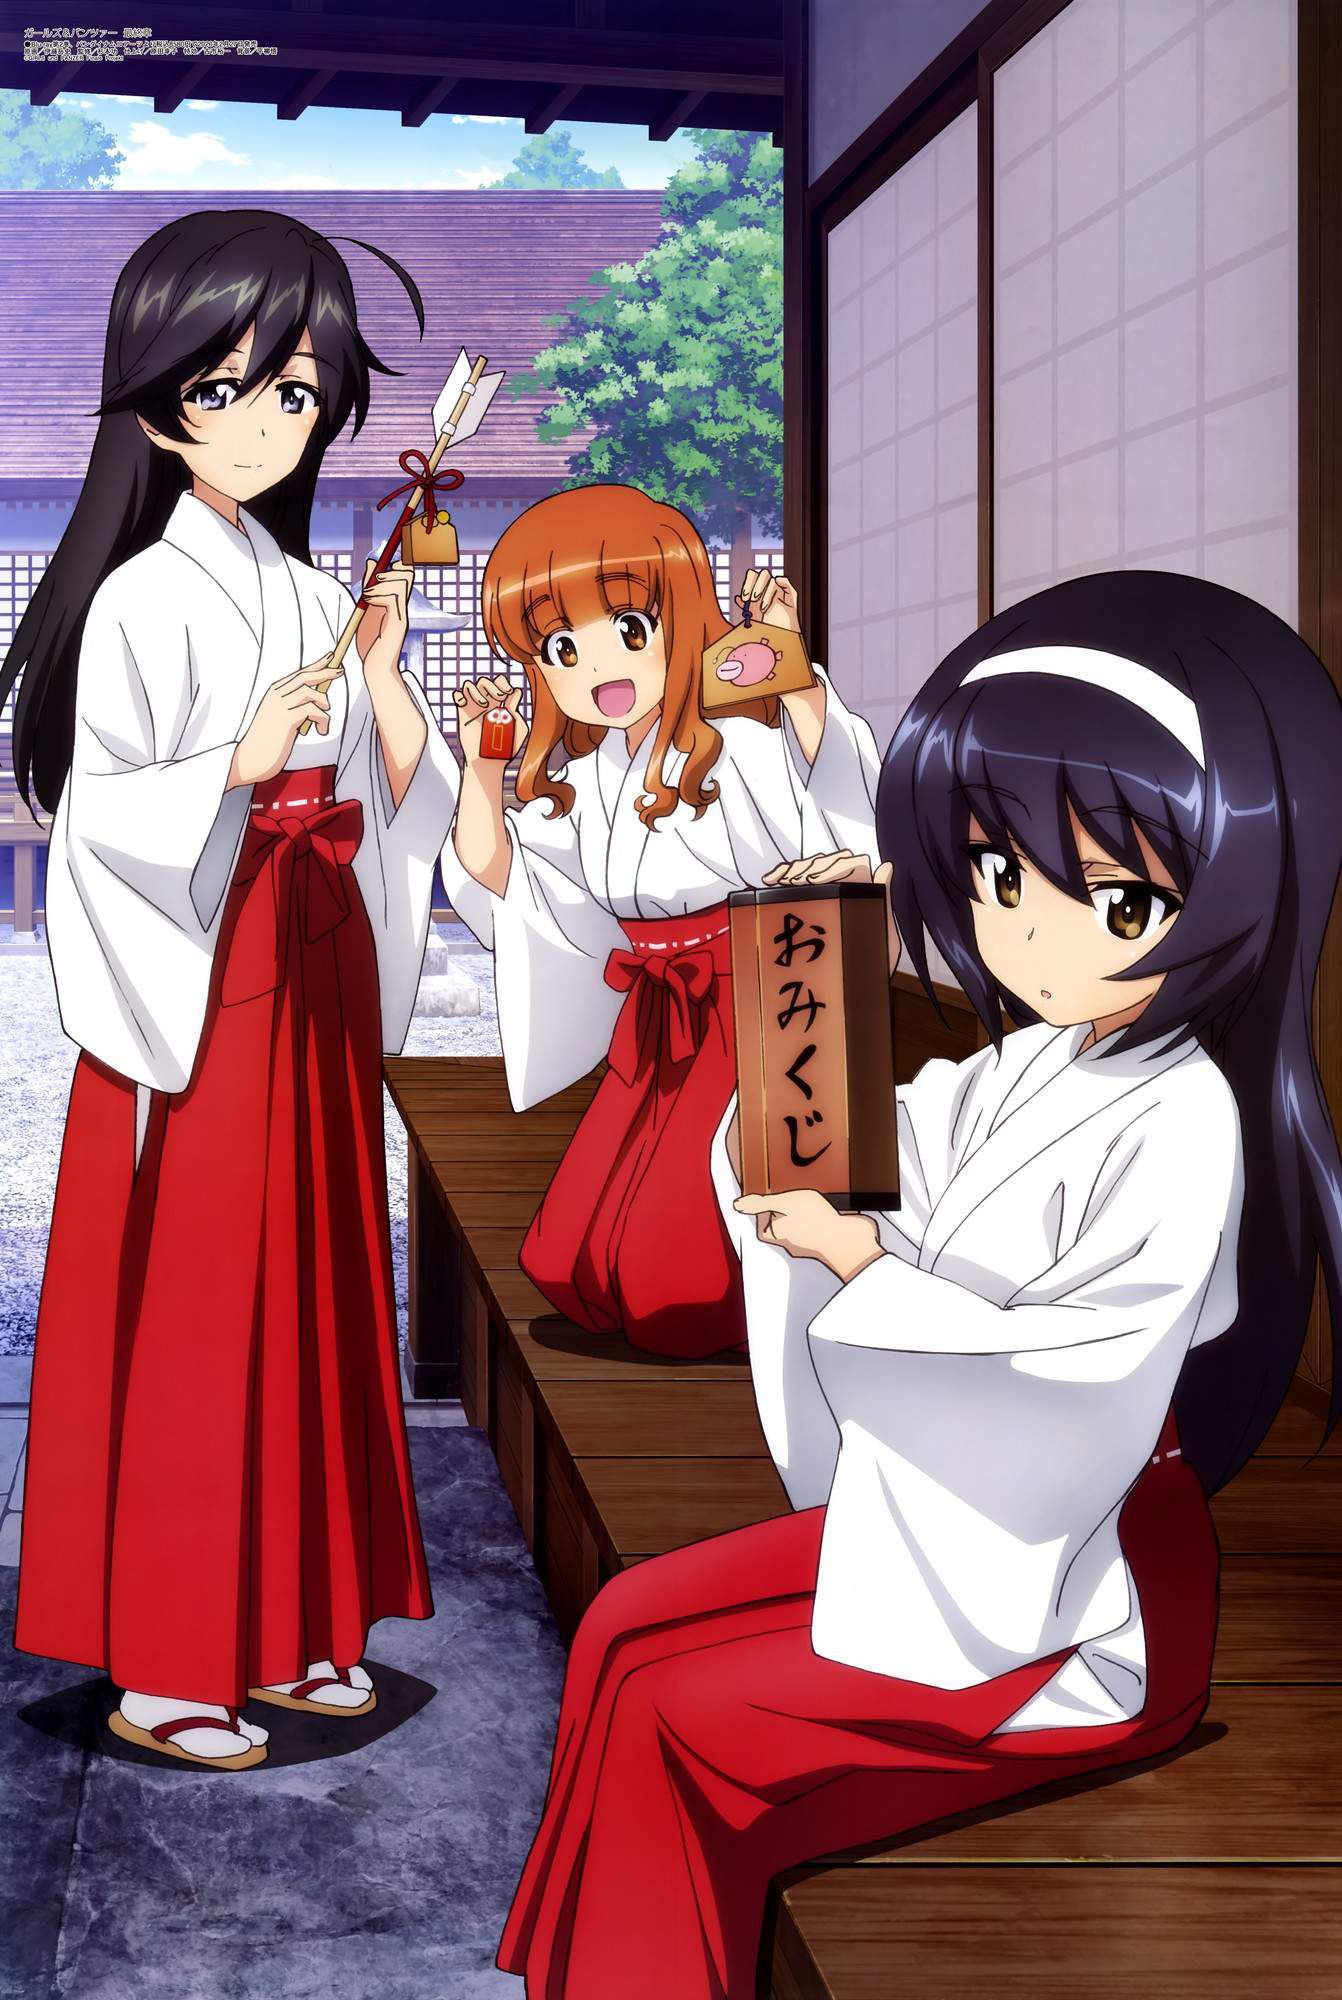 I will release the erotic image folder of the shrine maiden 1